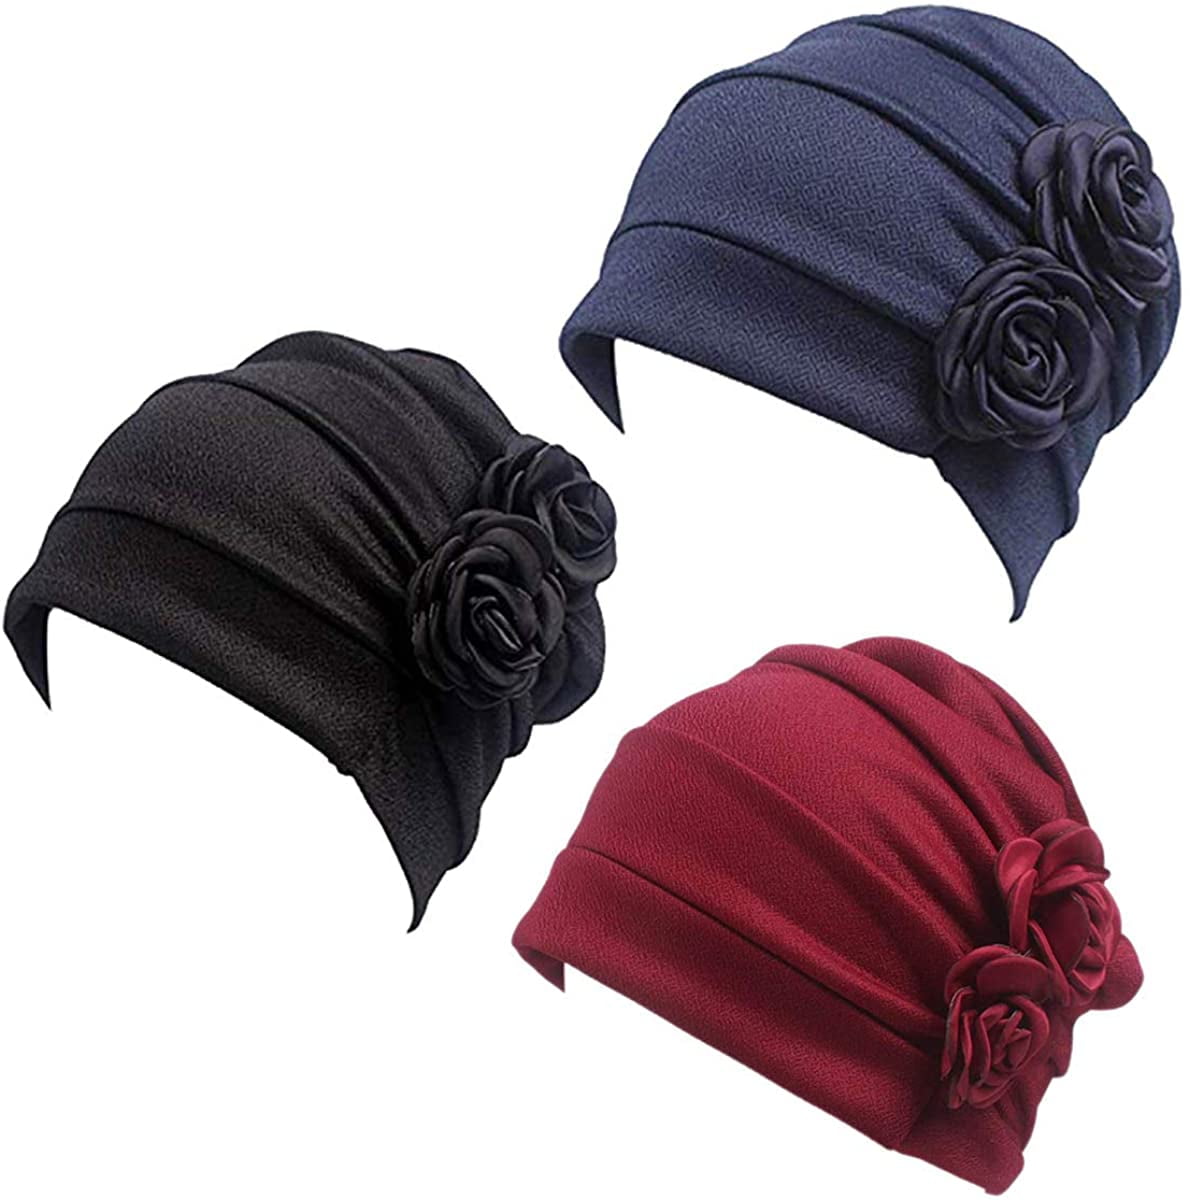 Knot Hairband Functionary Cap Baby Hats Cloth Turbanhat Turban Knitted Bow YS 